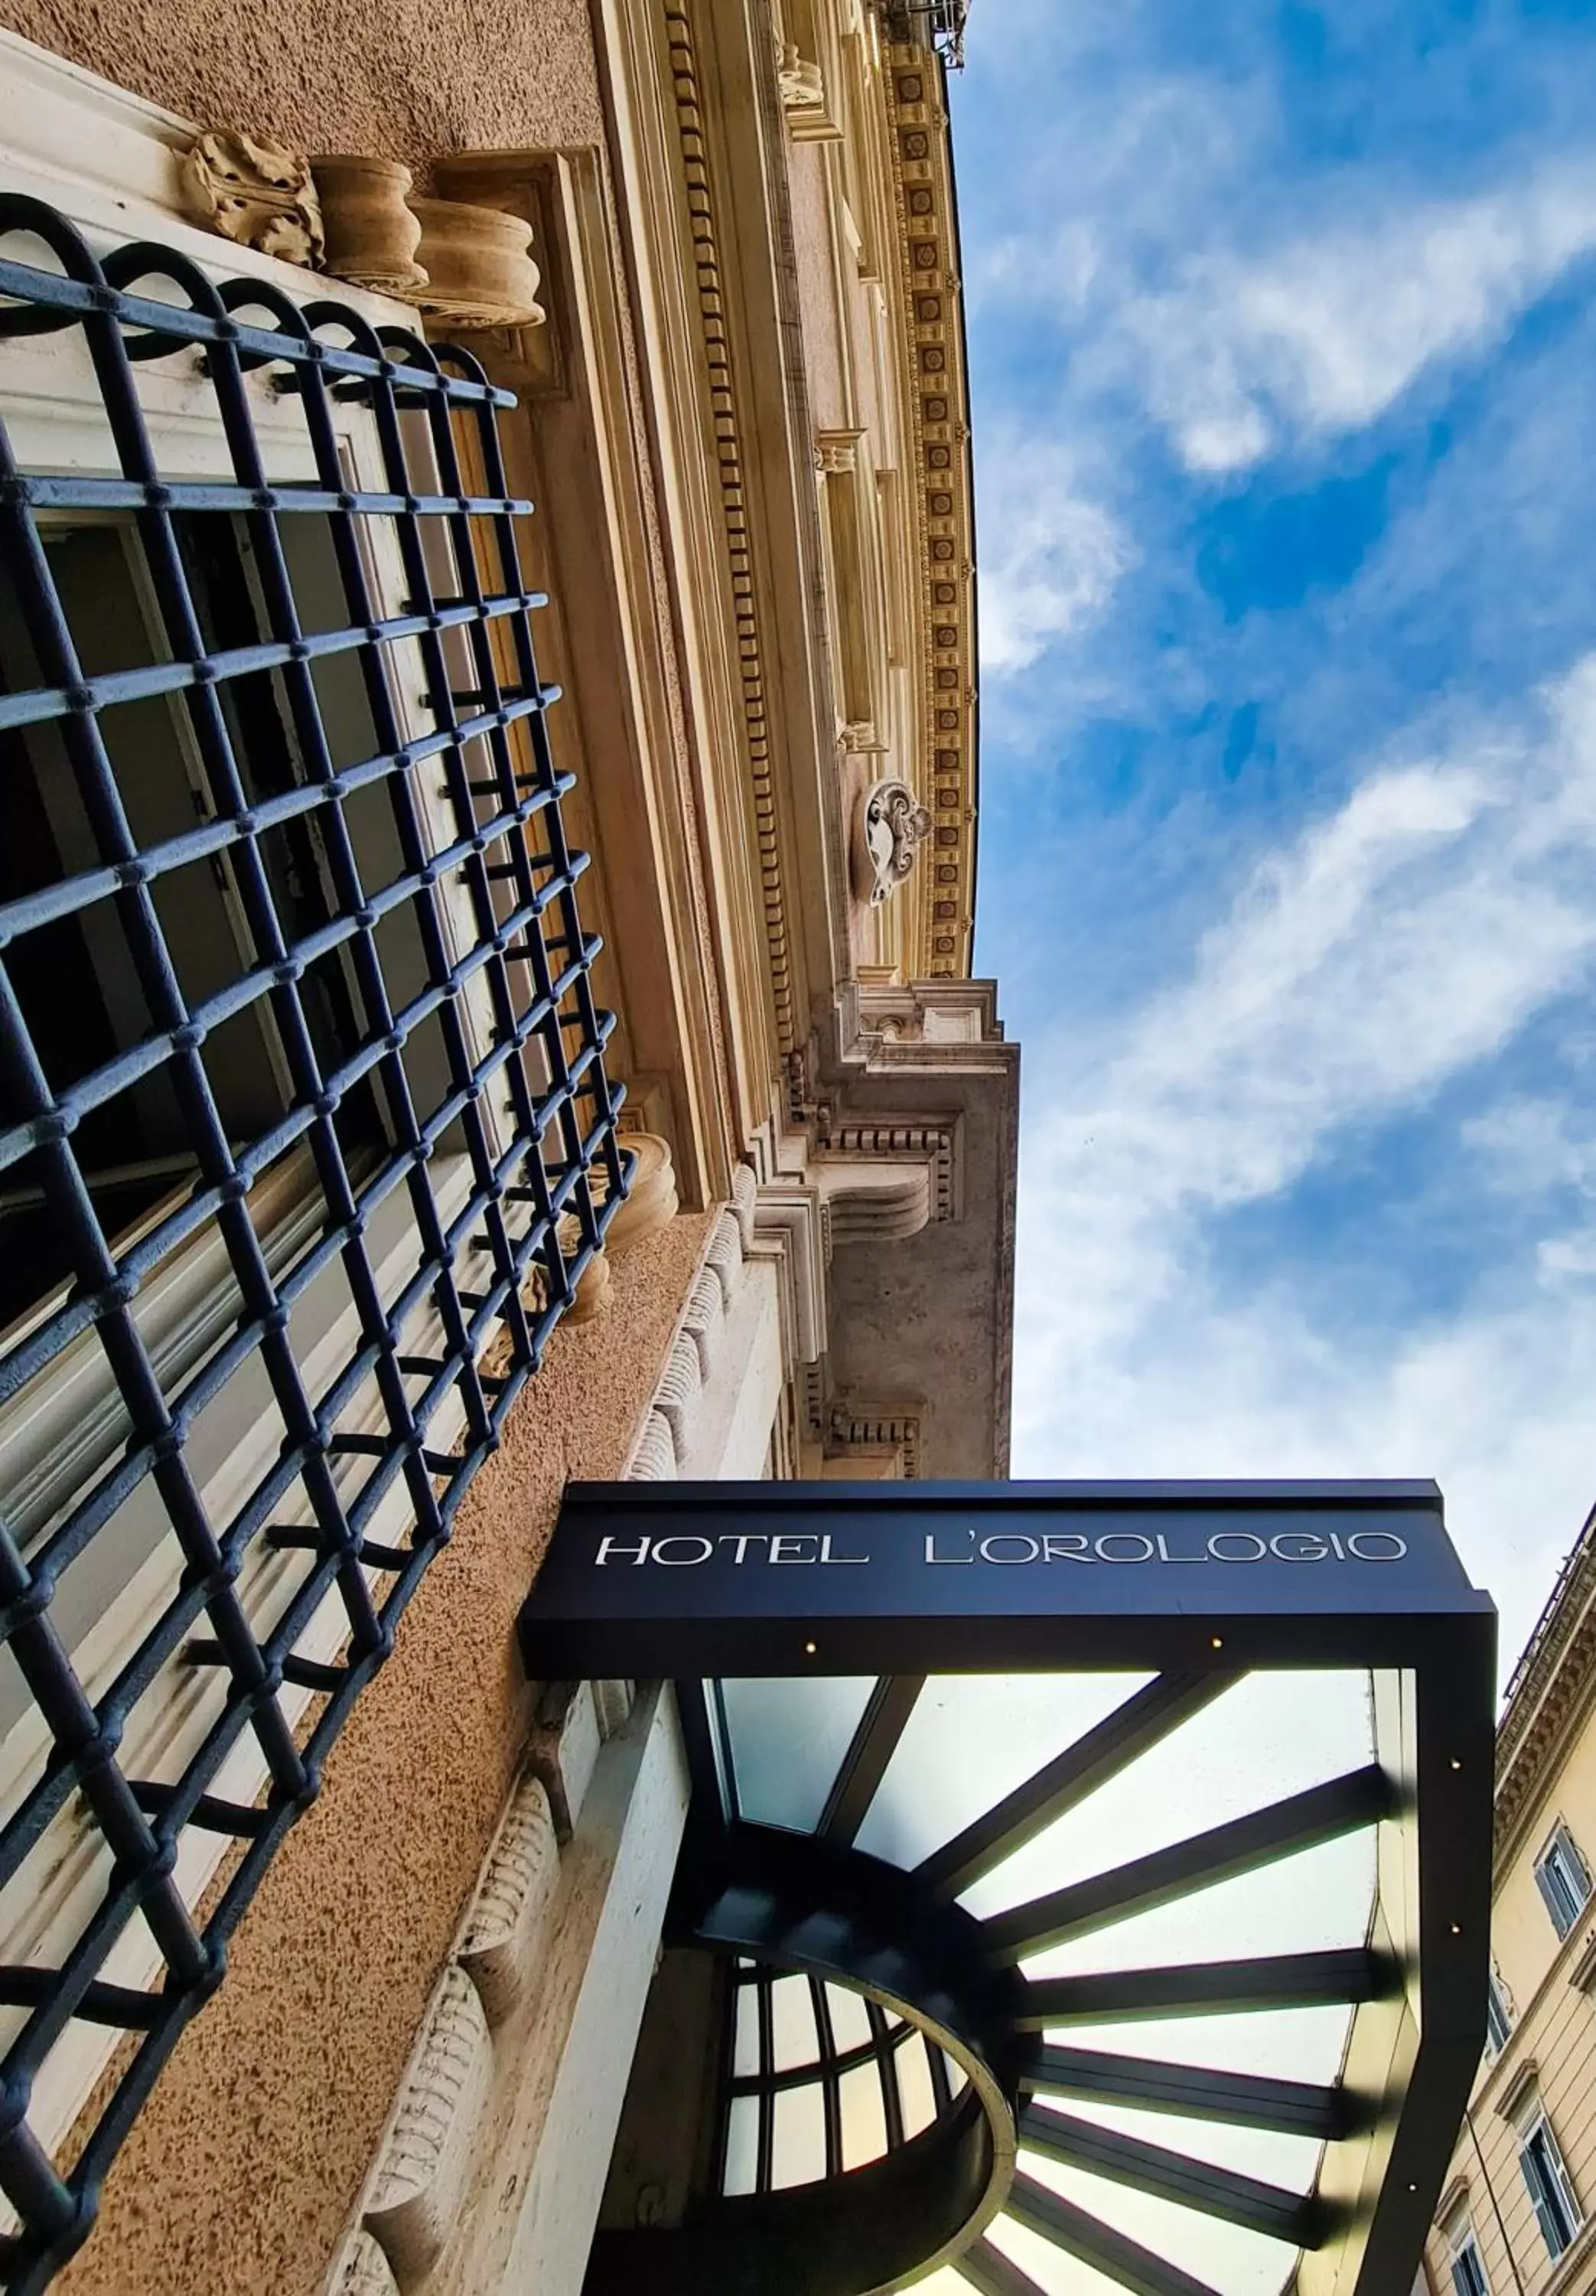 Property building in Hotel L'Orologio Roma - WTB Hotels